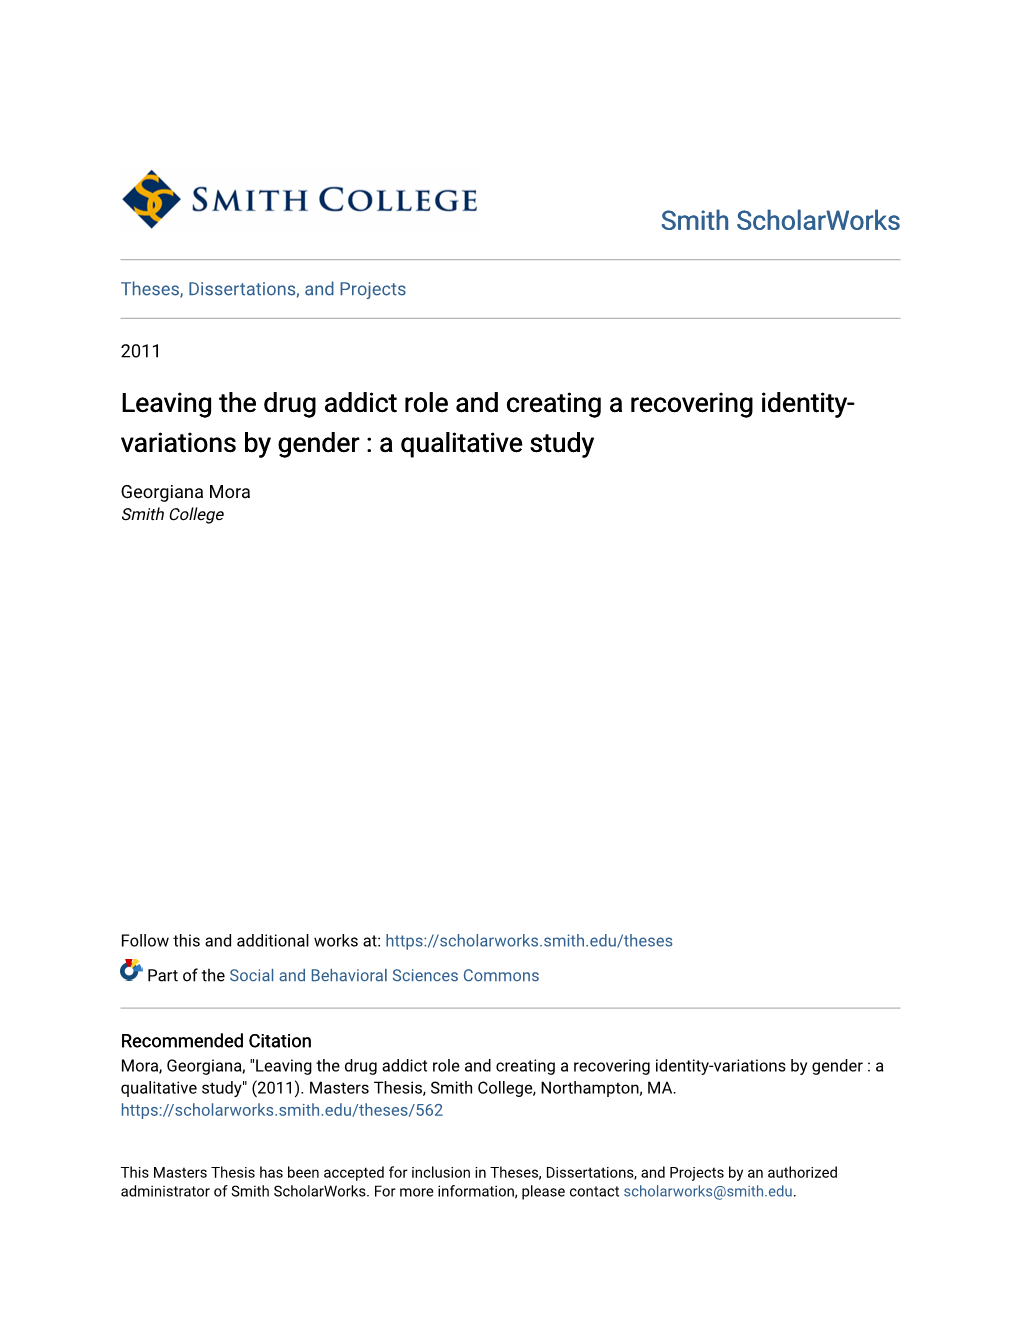 Leaving the Drug Addict Role and Creating a Recovering Identity- Variations by Gender : a Qualitative Study